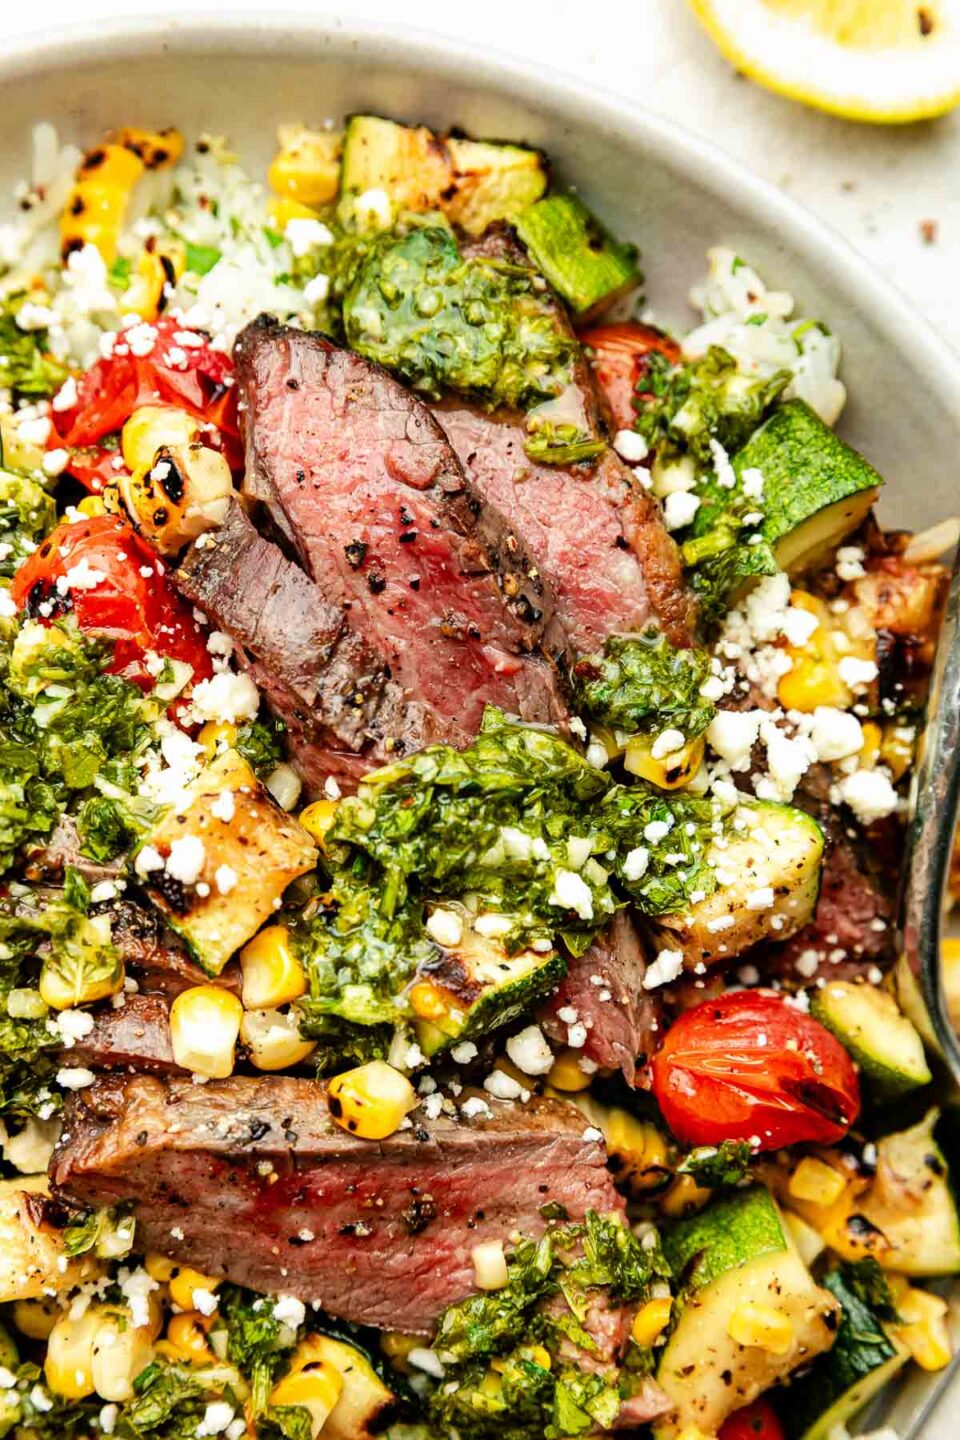 A close-up overhead shot of a chimichurri steak bowl atop a white textured surface.